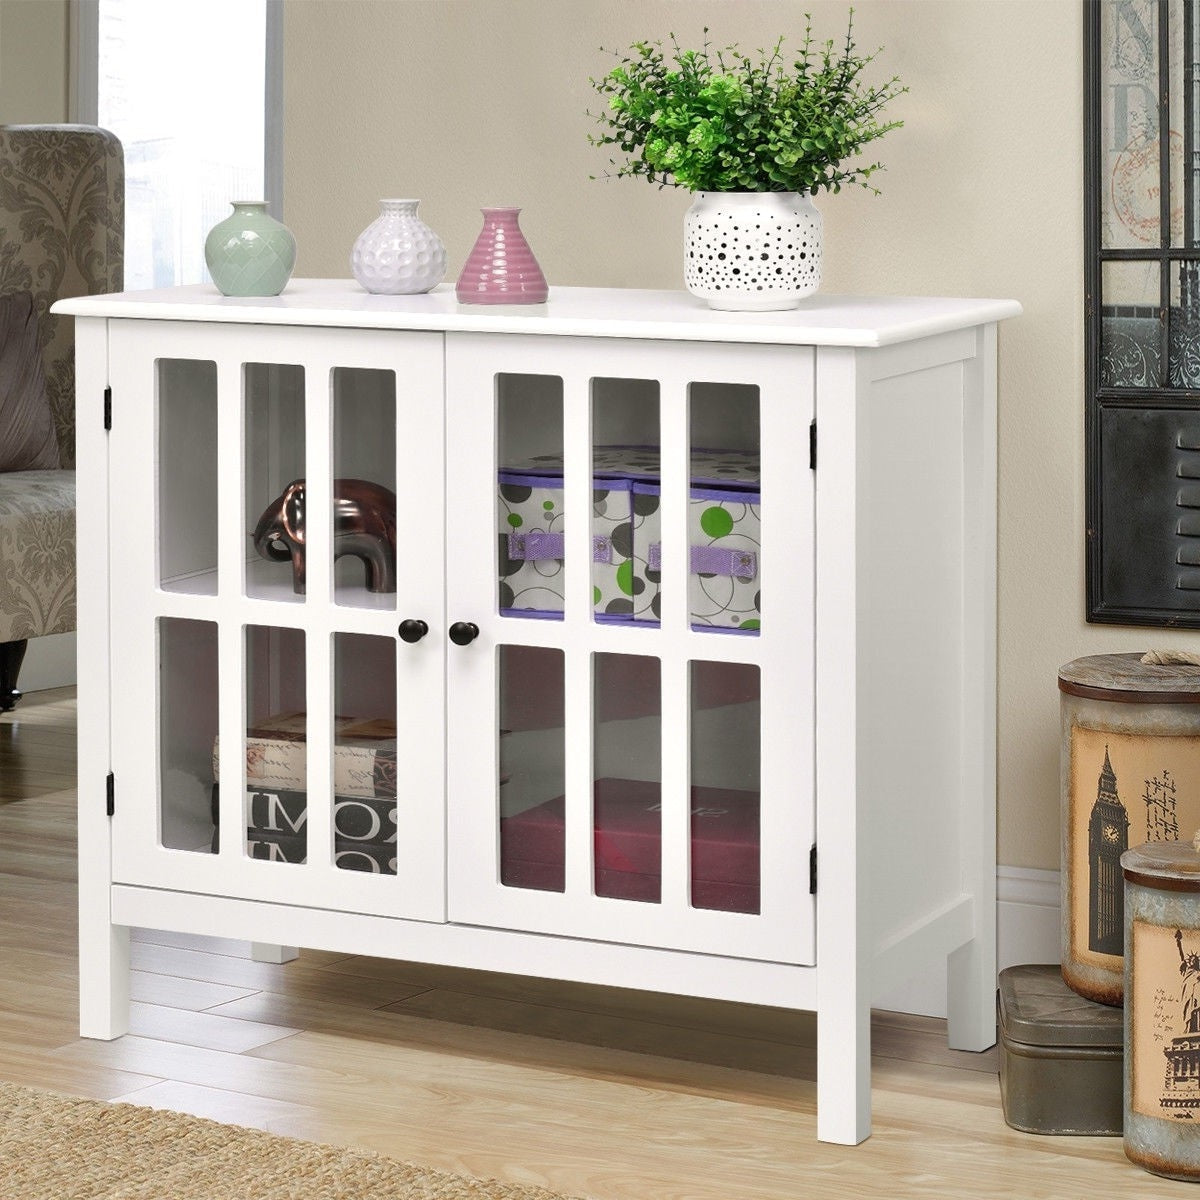 Dining > Sideboards & Buffets - White Wood Sideboard Buffet Cabinet With Glass Panel Doors